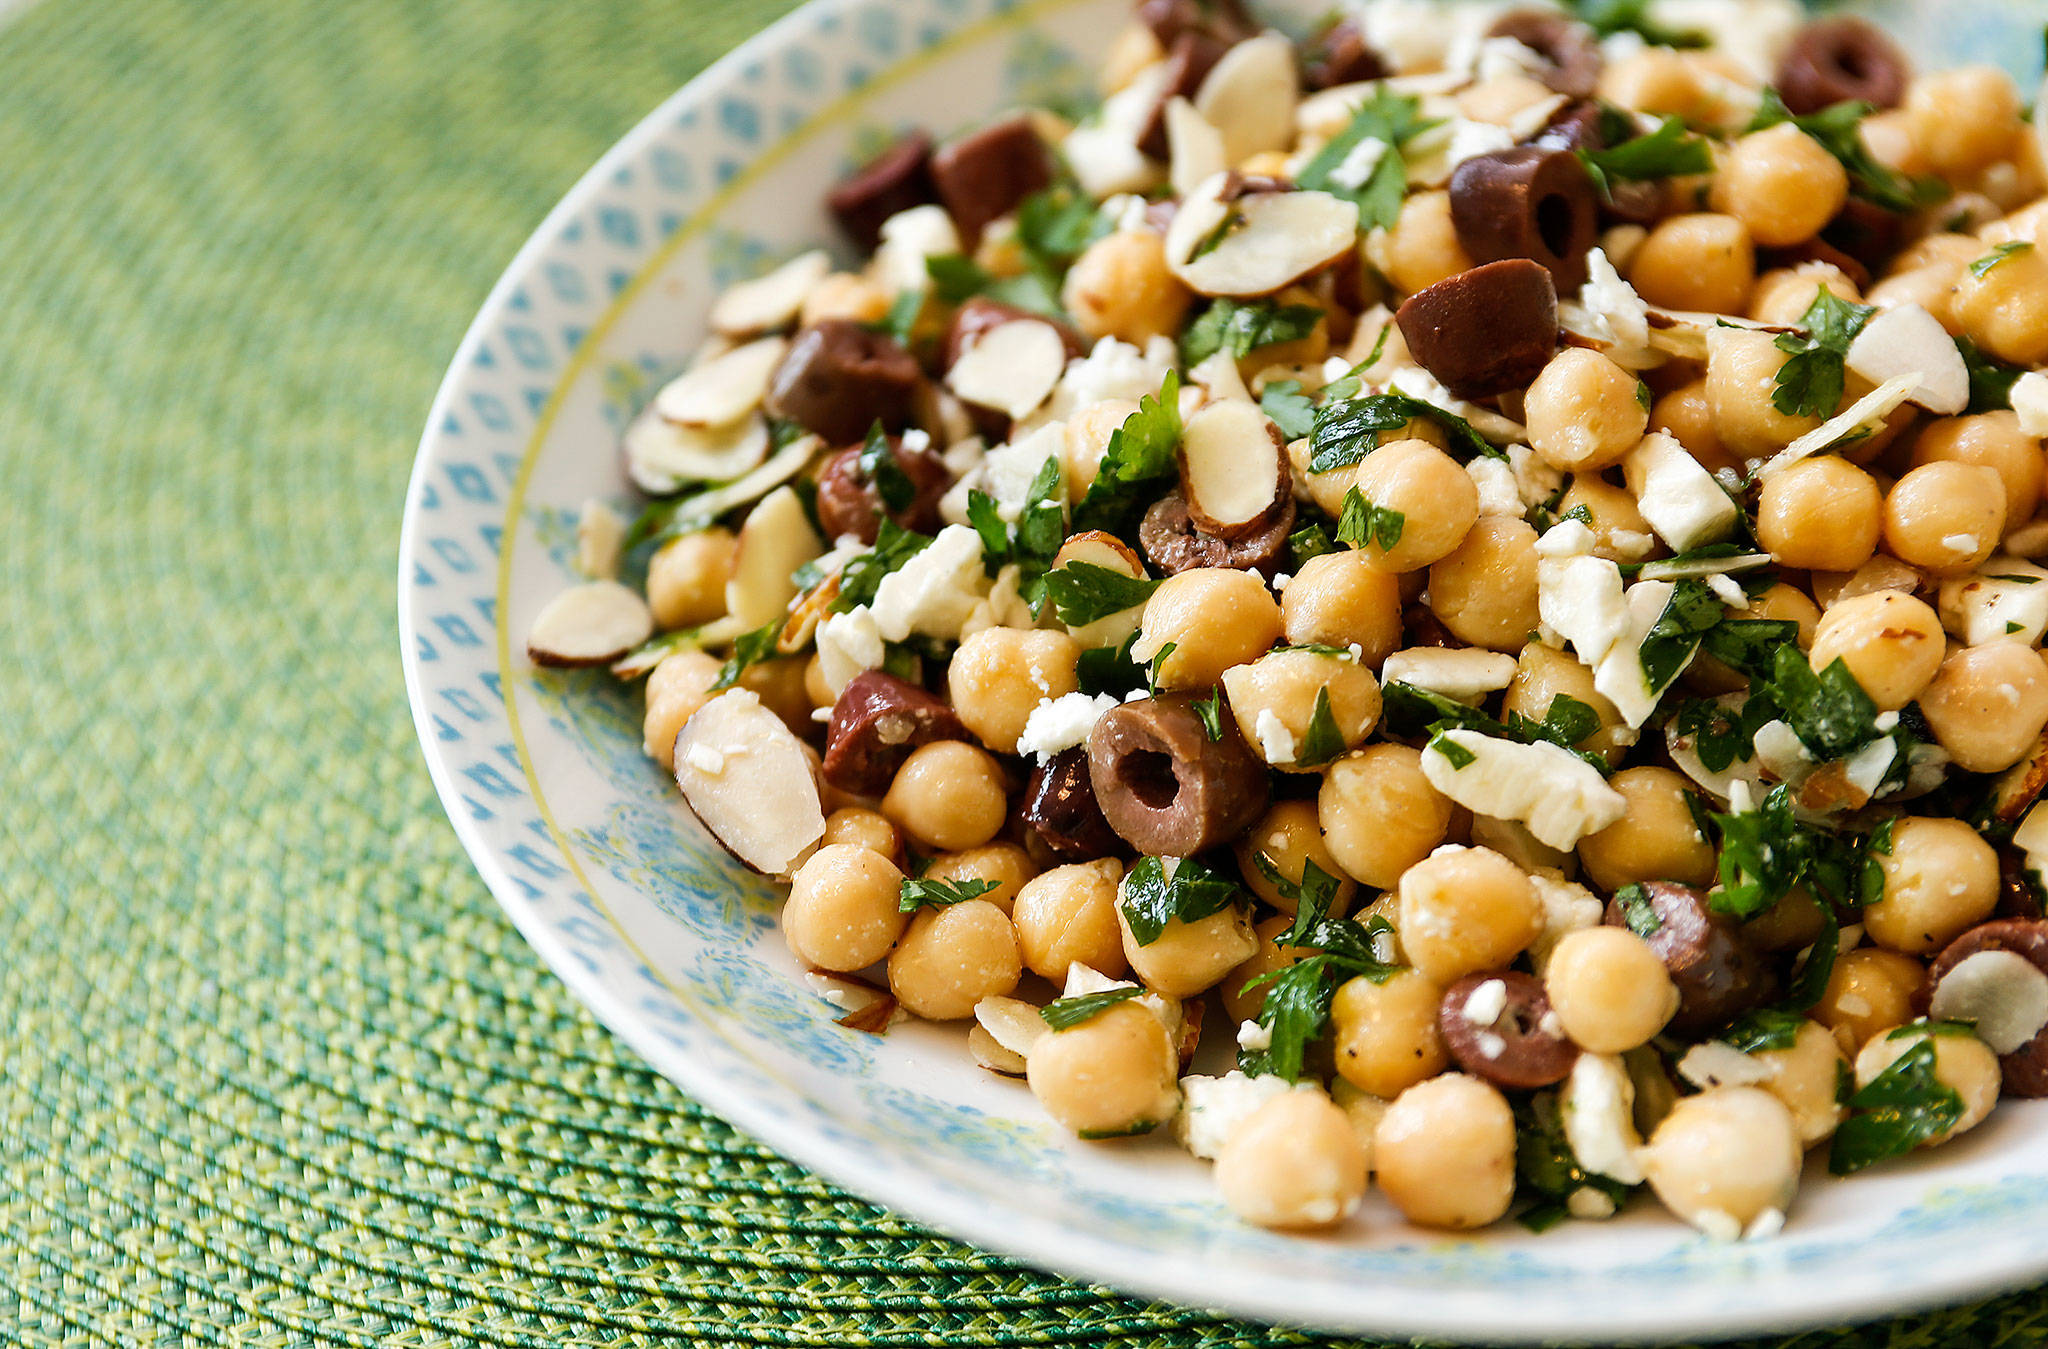 Mediterranean chickpea salad is classy way to eat one of the world’s pantry staples. (Andy Bronson / The Herald)